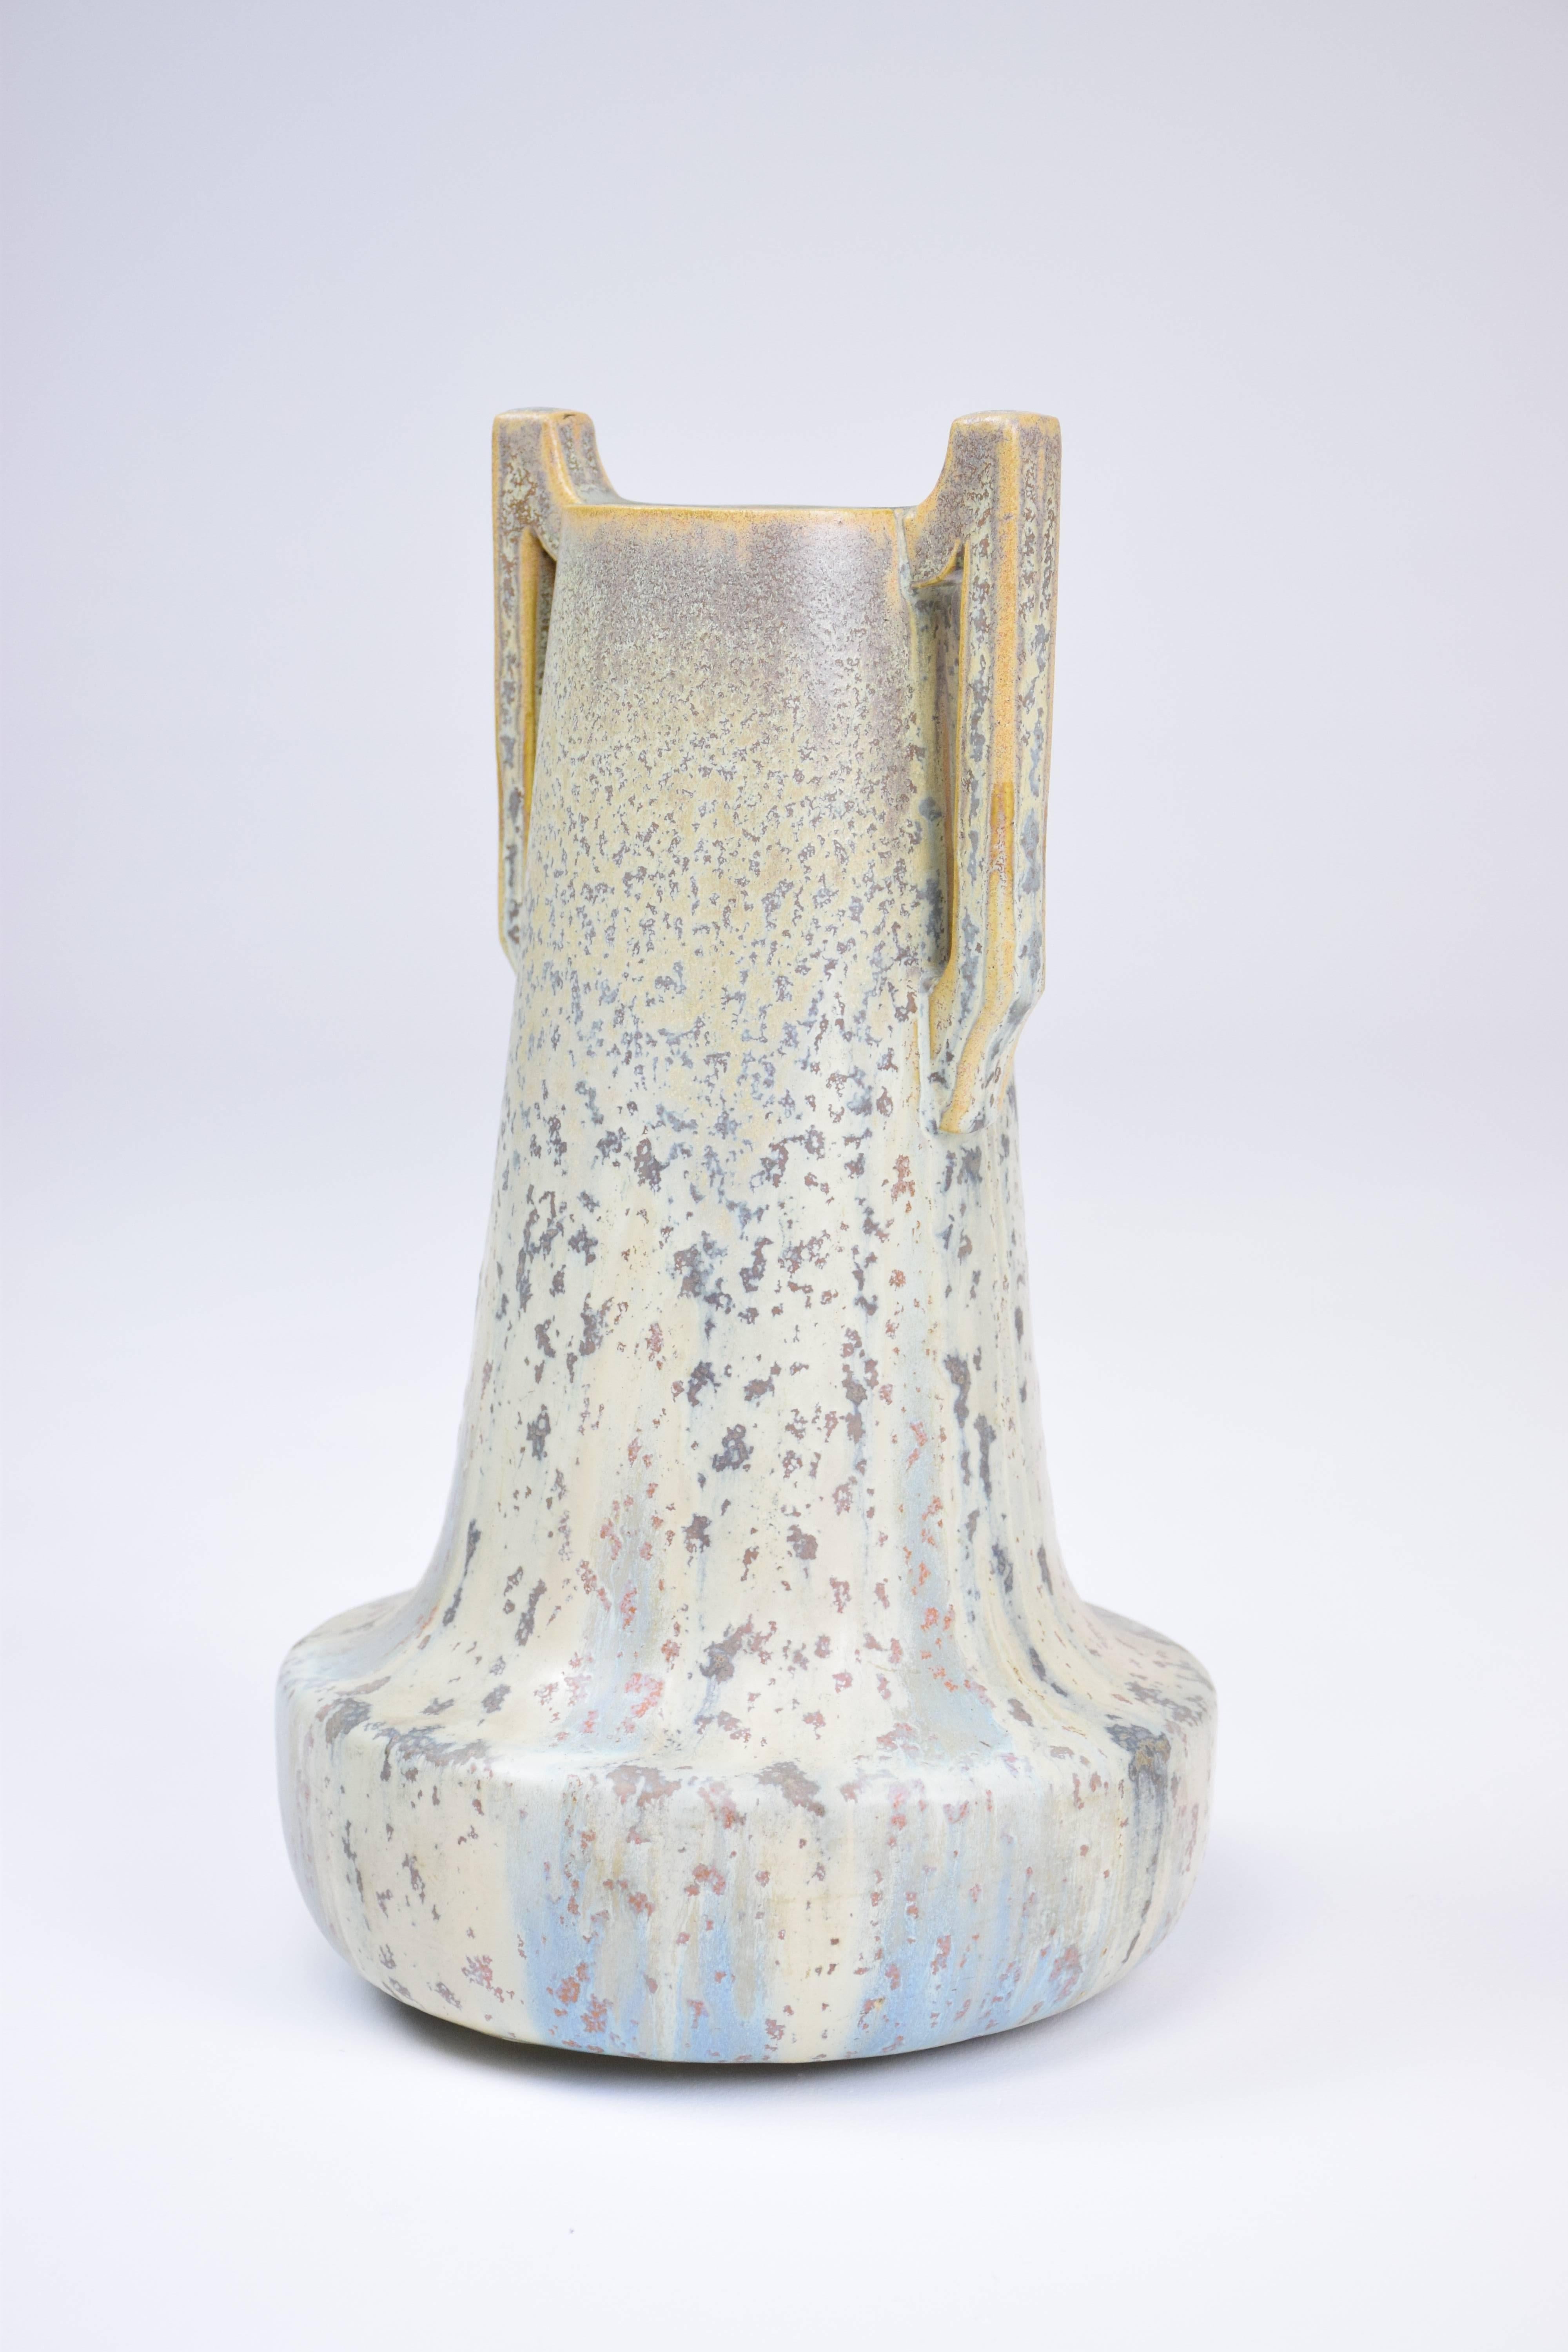 Sandstone vase with handles by French Art Nouveau ceramist Jean Langlade, France circa 1879-1928. Beautiful hues of light blue, red, white, yellow green. 

Signed by maker at the bottom. 

